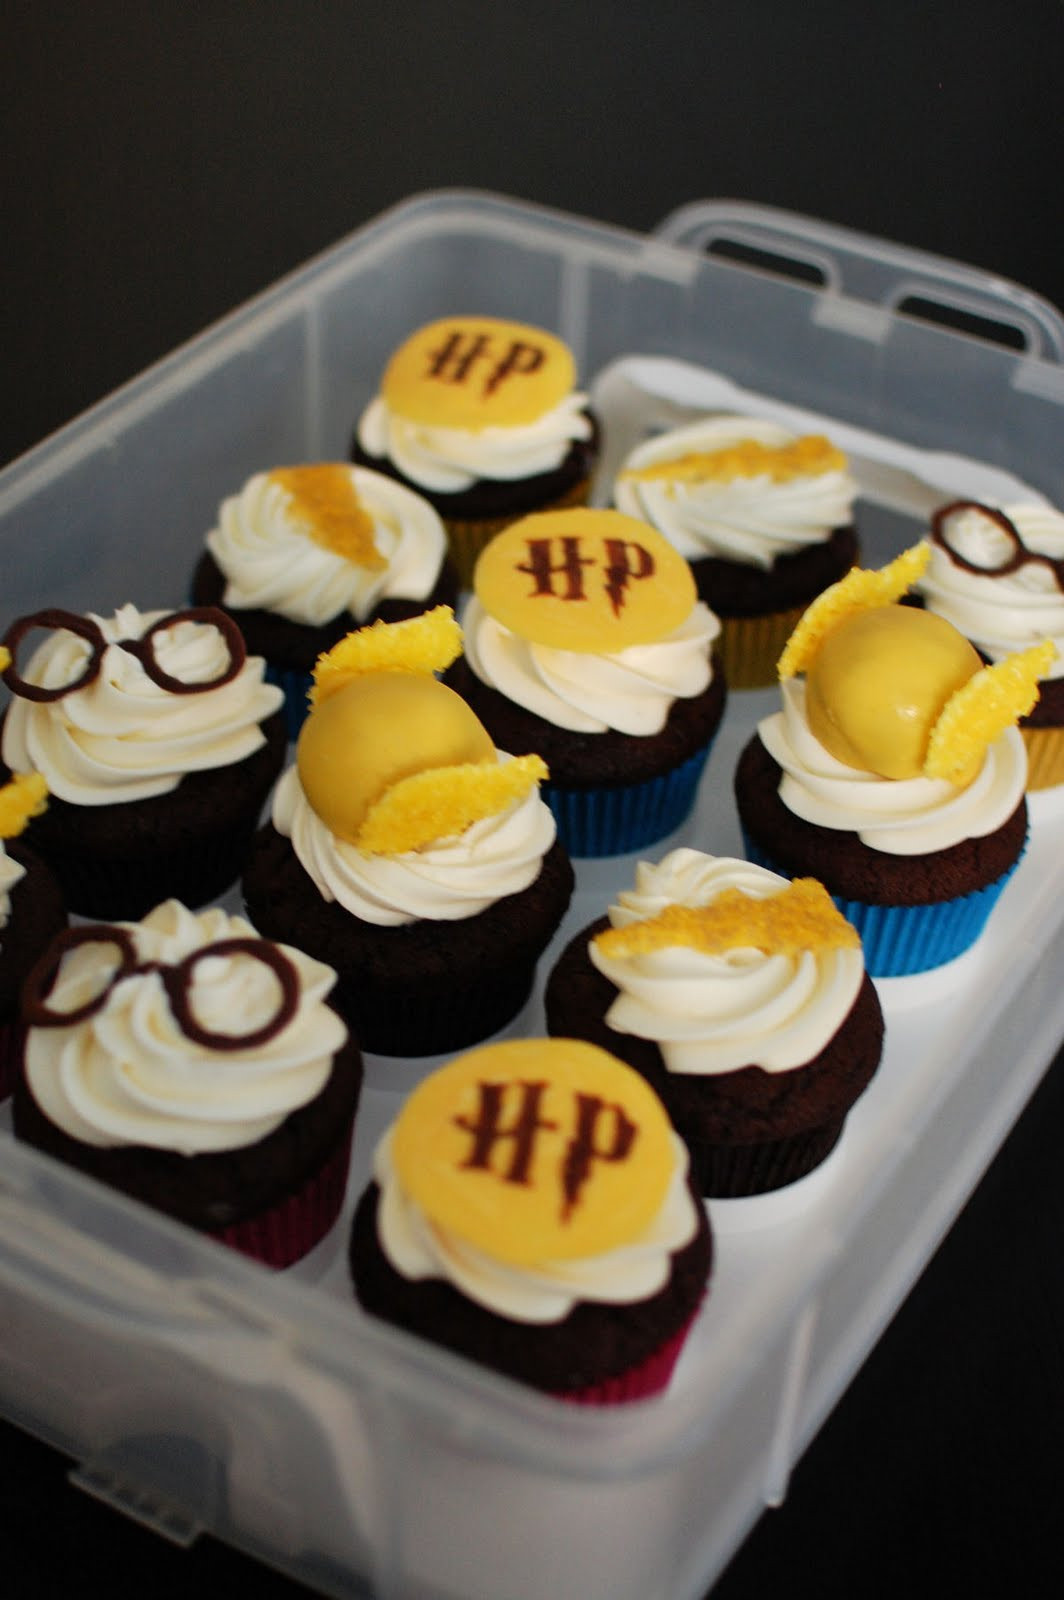 Harry Potter Cupcakes
 More Harry Potter Cupcakes Including Golden Snitch